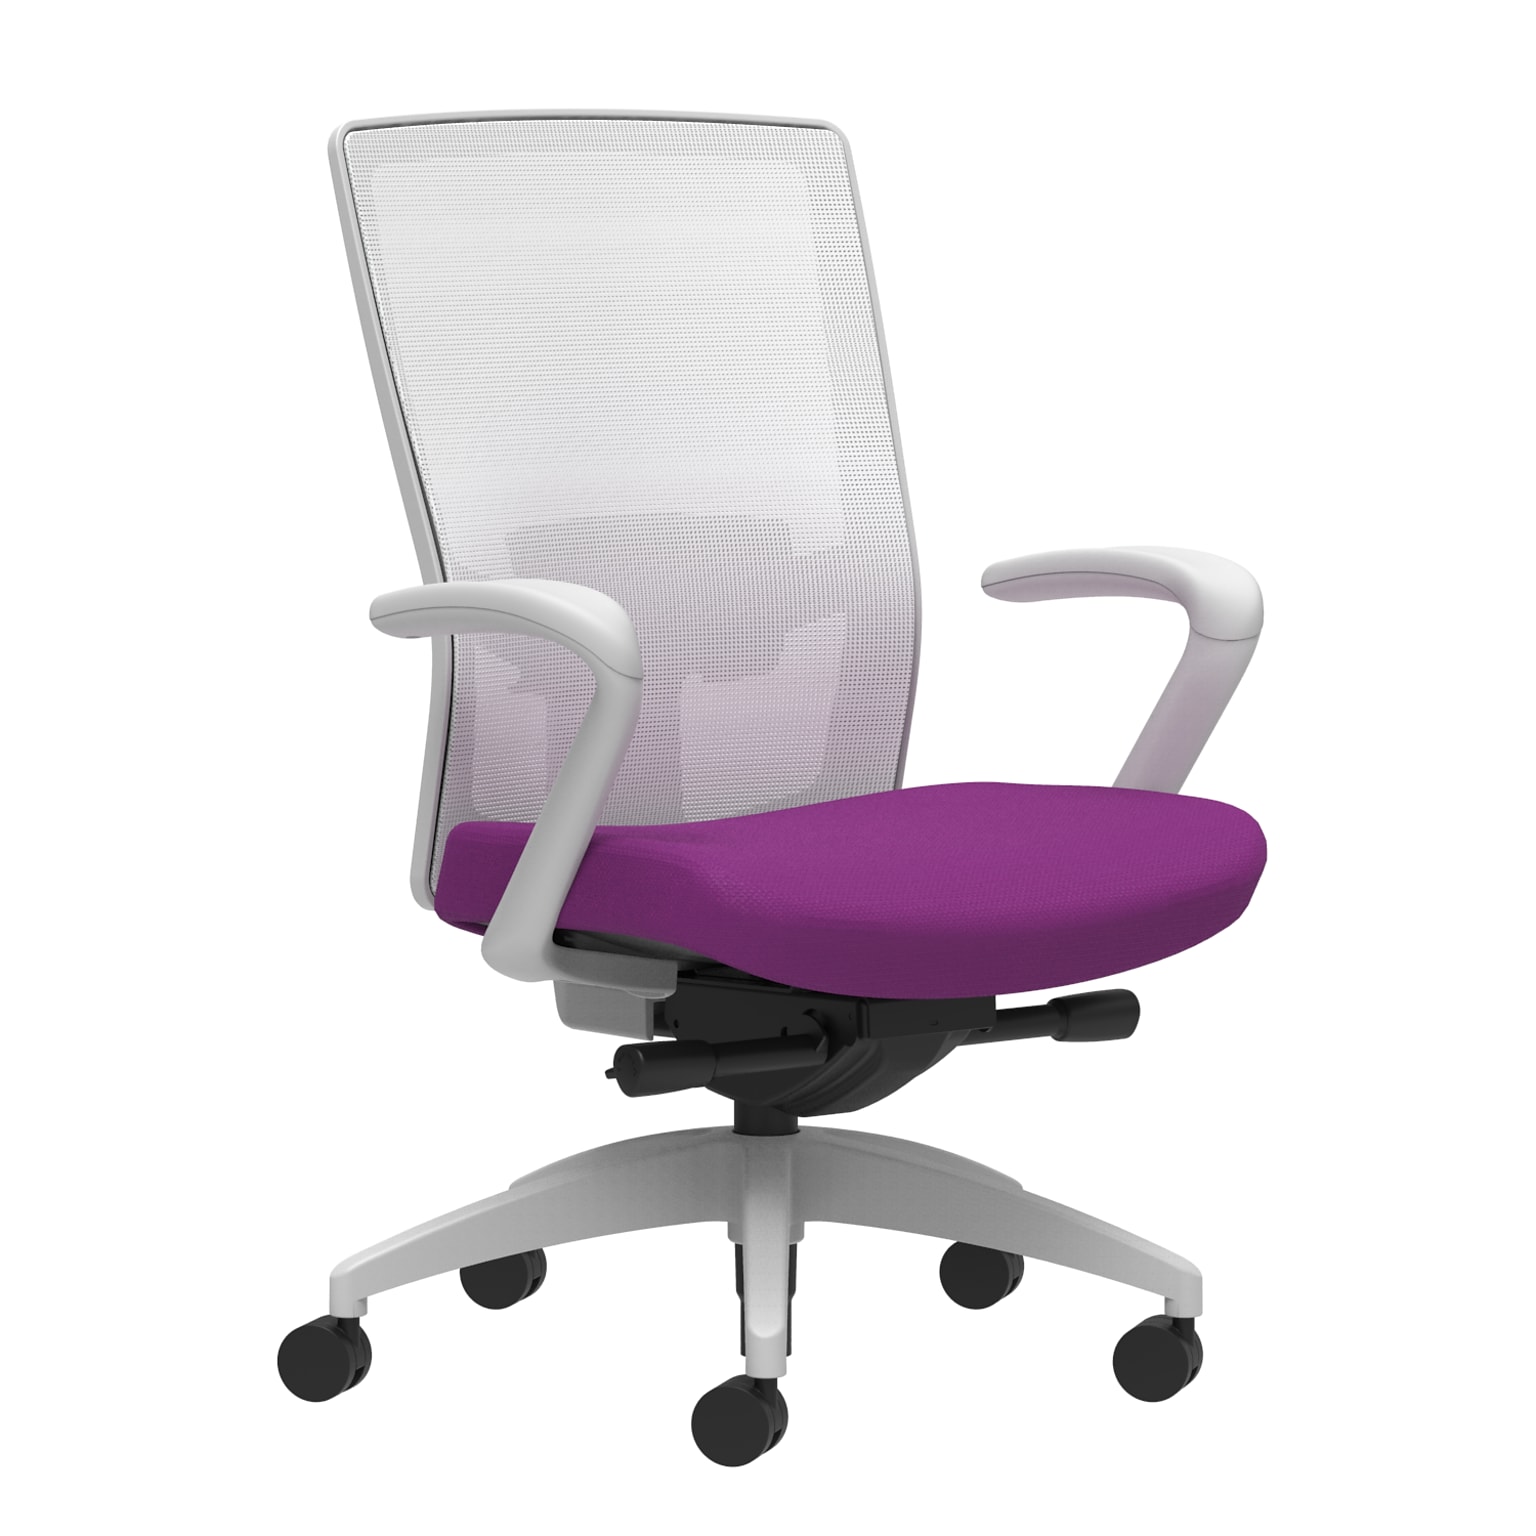 Union & Scale Workplace2.0™ Fabric Task Chair, Amethyst, Adjustable Lumbar, Fixed Arms, Adv Synchro-Tilt Seat Control (53577)